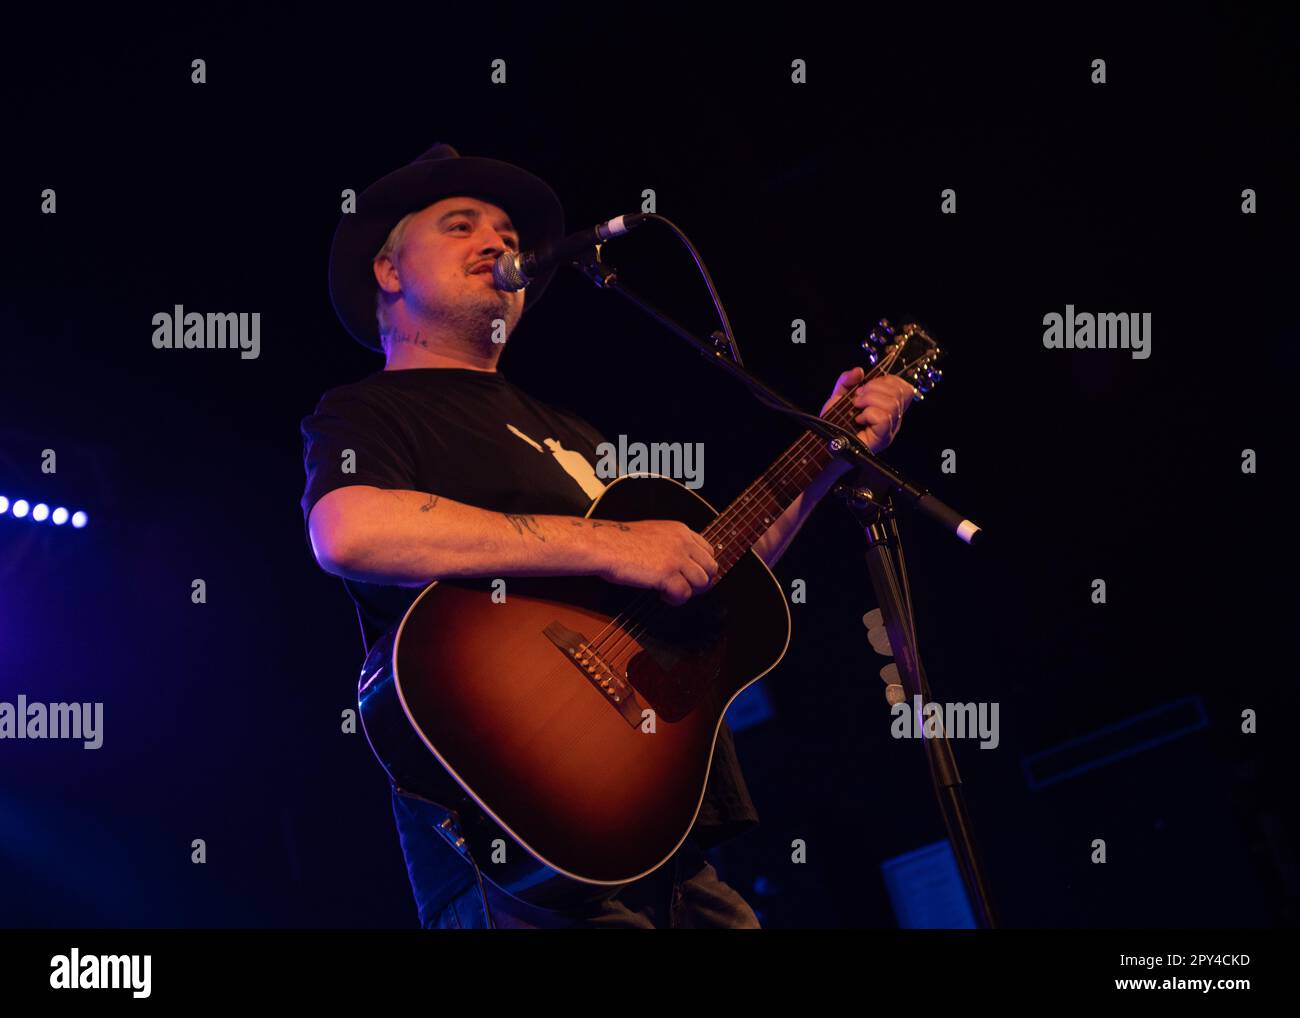 London, UK. 2nd May 2023. Peter Doherty plays an acoustic solo live gig in Oxford as part of his UK tour. Cristina Massei/Alamy Live News Stock Photo